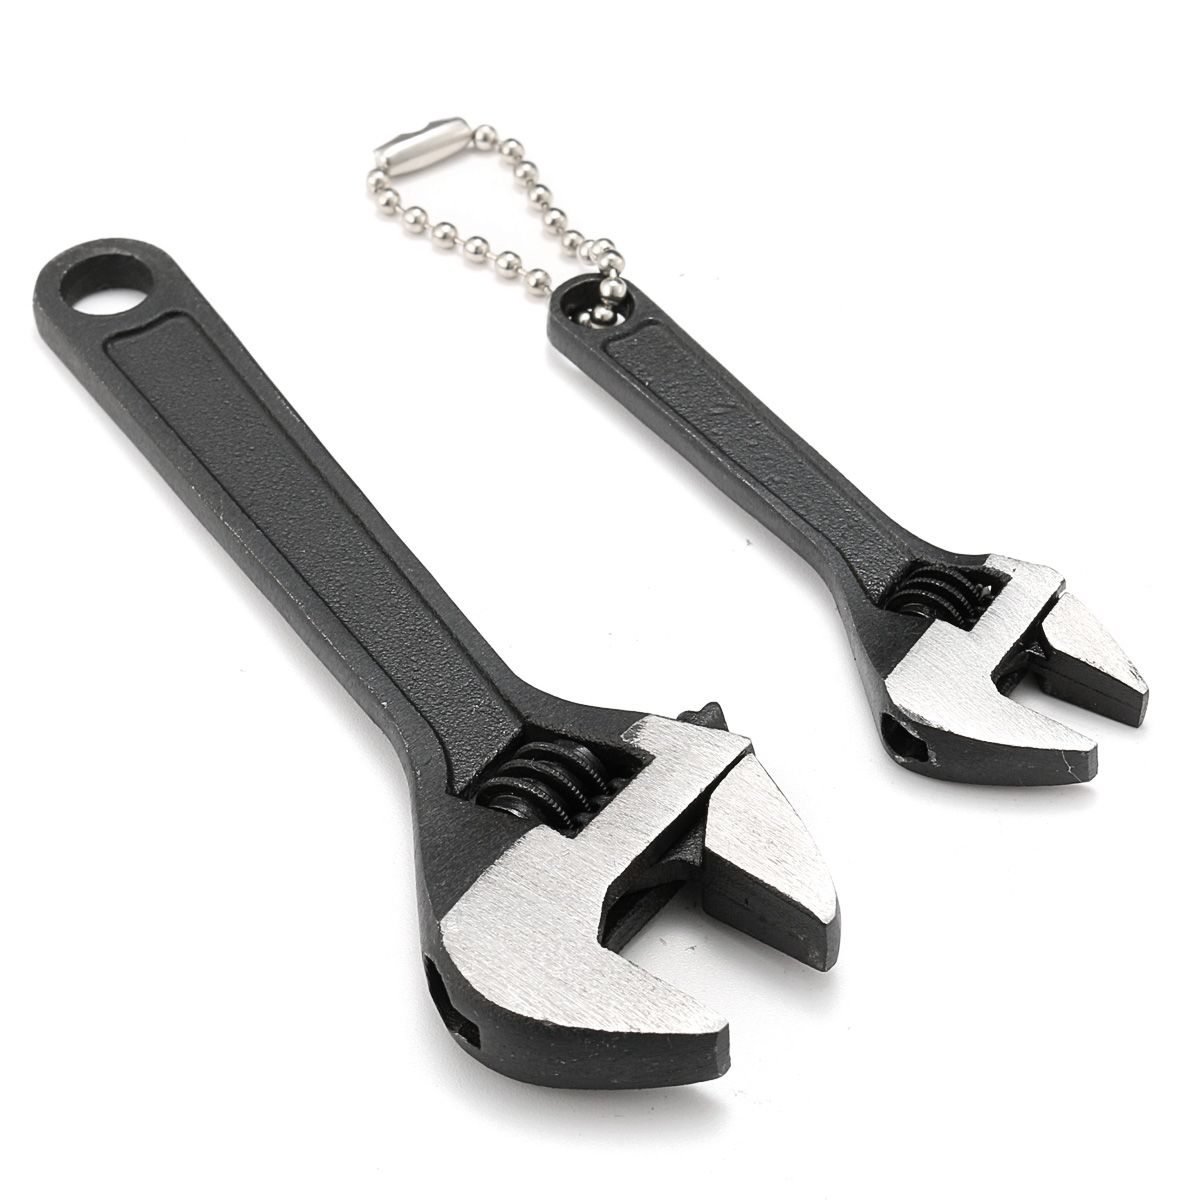 2Pcs-25inch-amp-4inch-Mini-Metal-Adjustable-Wrenches-Spanner-Hand-Jaw-Wrench-0-15mm-0-10mm-1137874